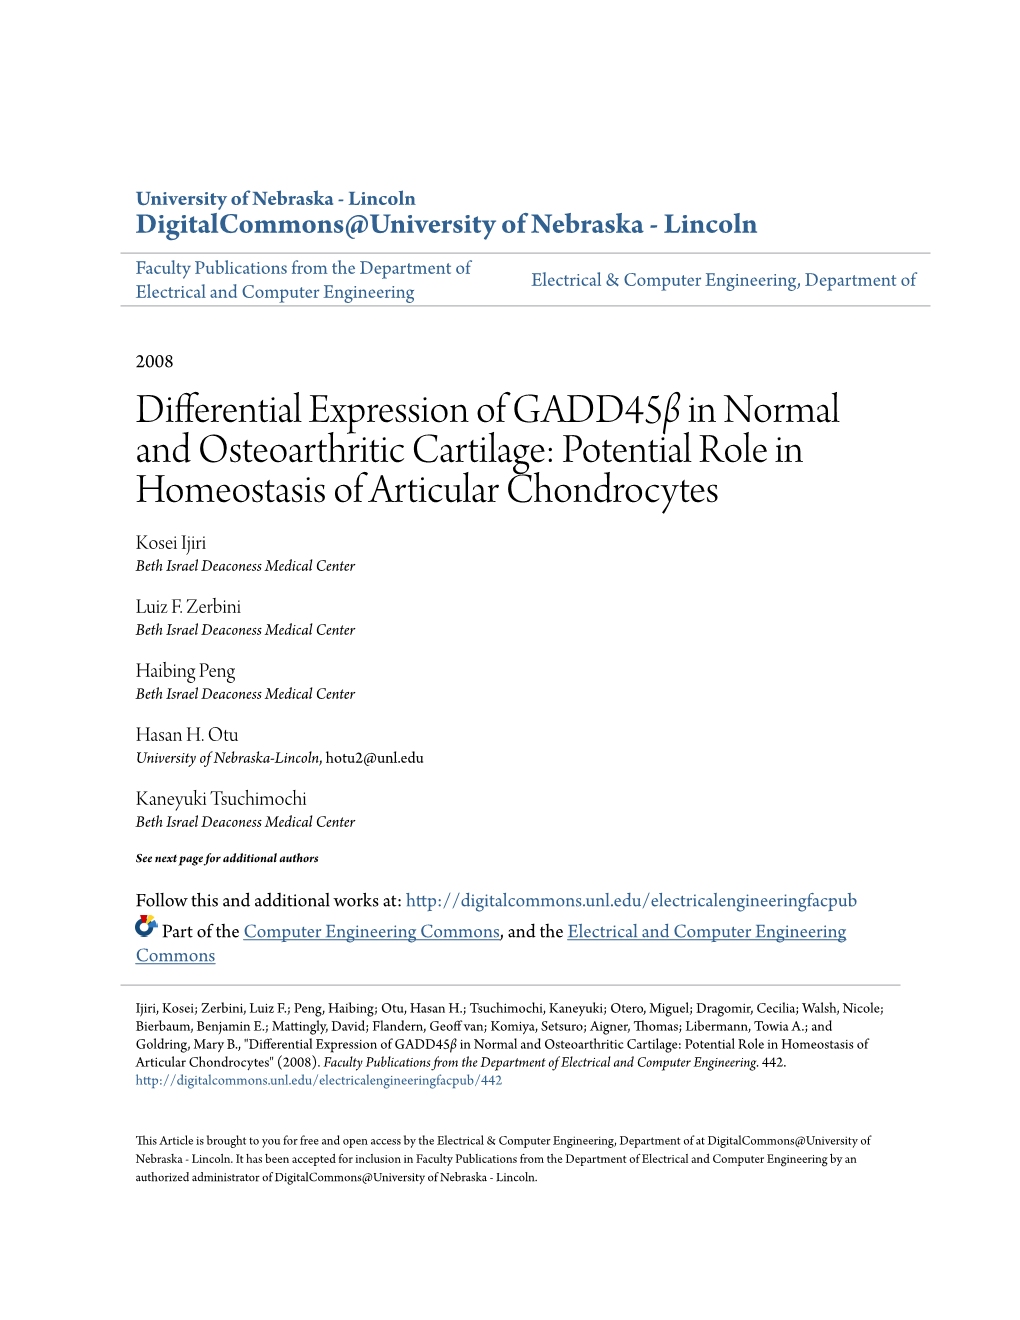 Differential Expression of Gadd45β in Normal and Osteoarthritic Cartilage